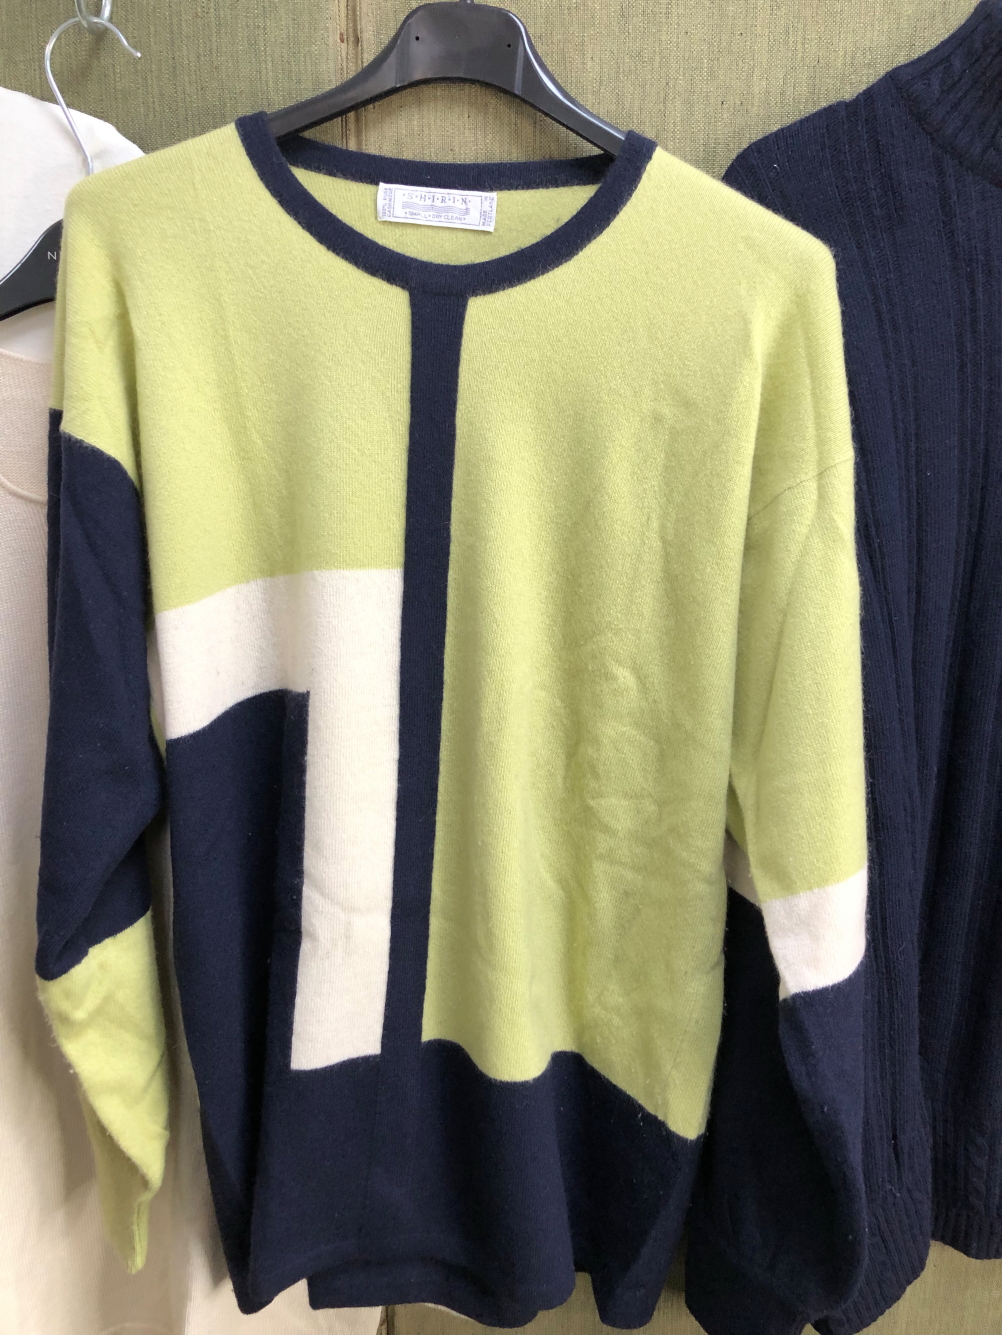 A CASHMERE AND LAMBS WOOL NAVY JUMPER, A SHIRIN CASHMERE SCOTTISH COLOUR BLOCK JUMPER, A ROLI - Image 3 of 8